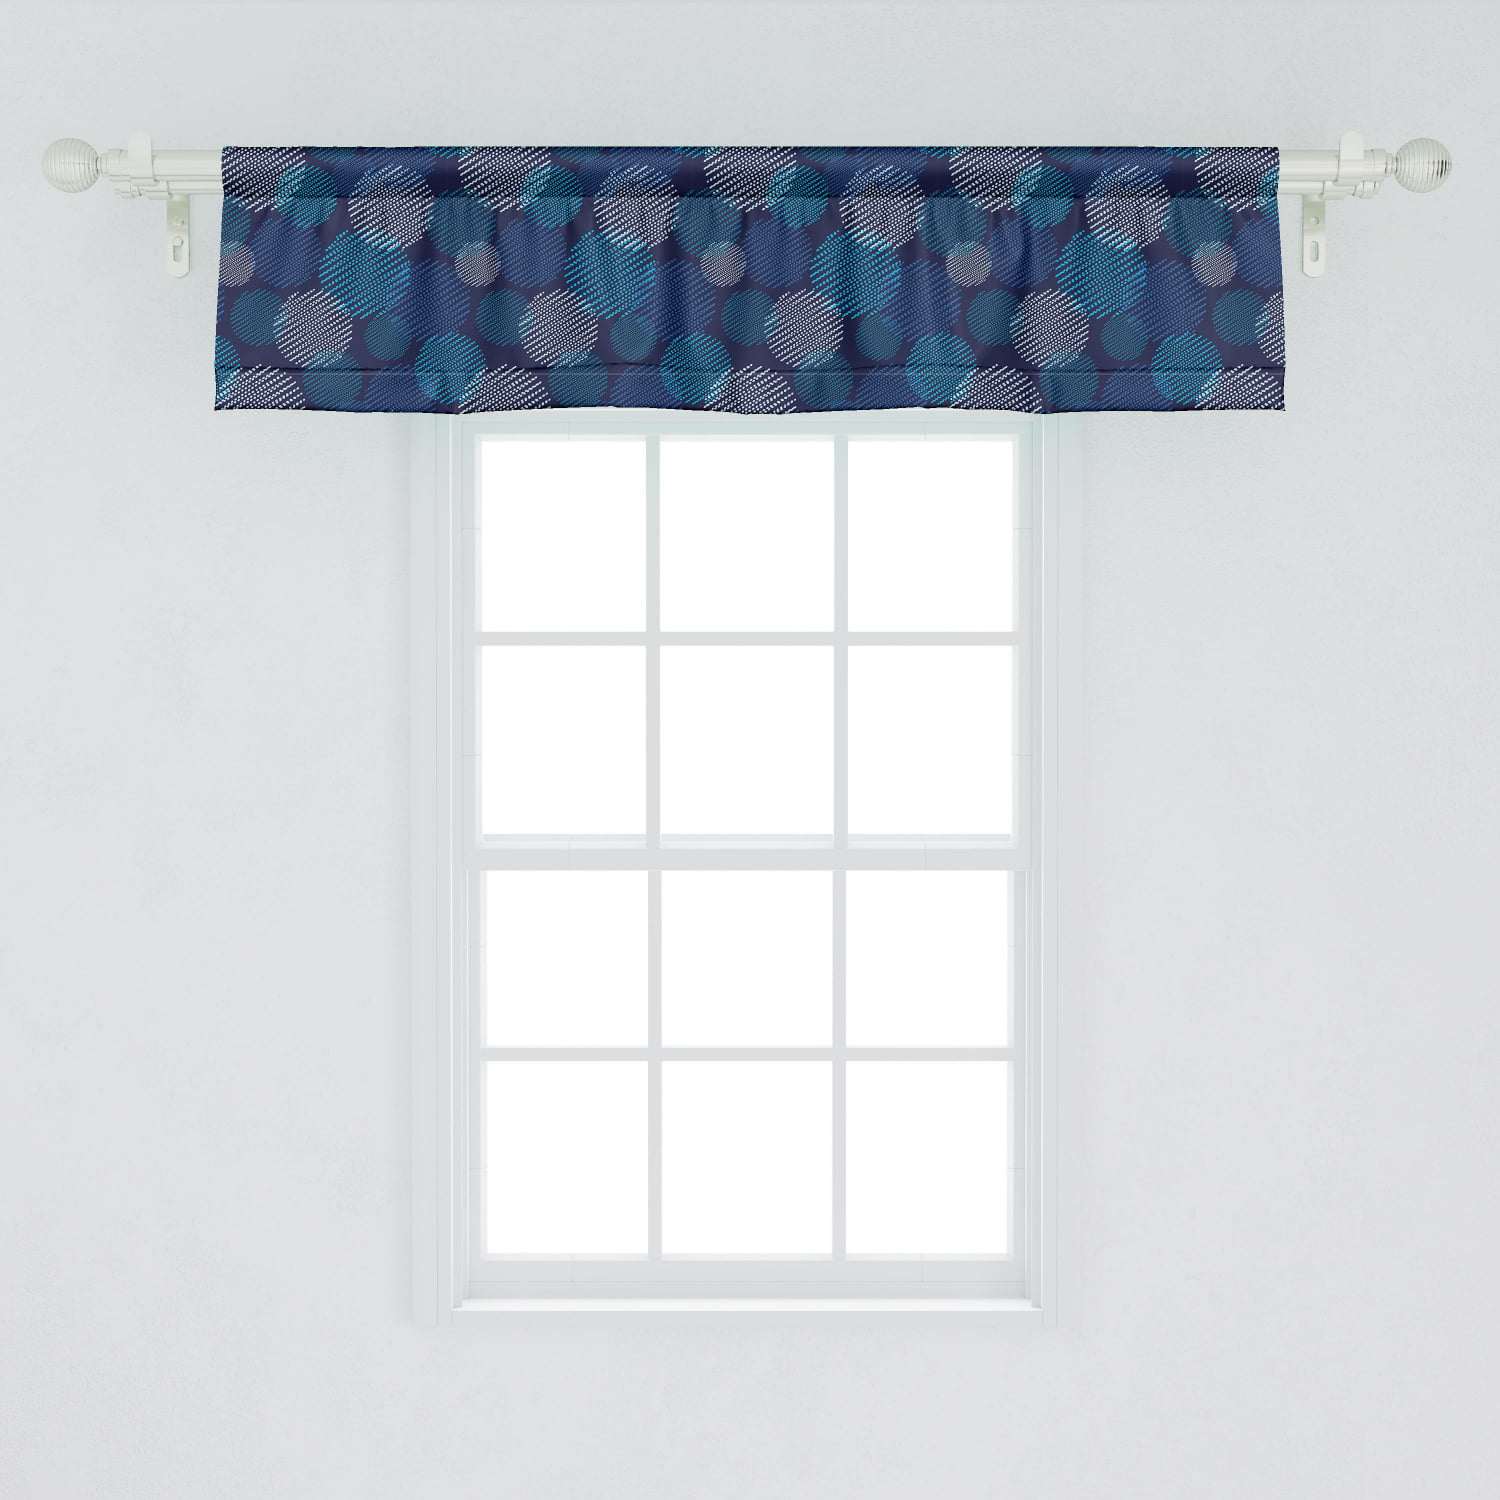 Ambesonne Abstract Window Valance, Modern Digital Featured Polka Dots ...